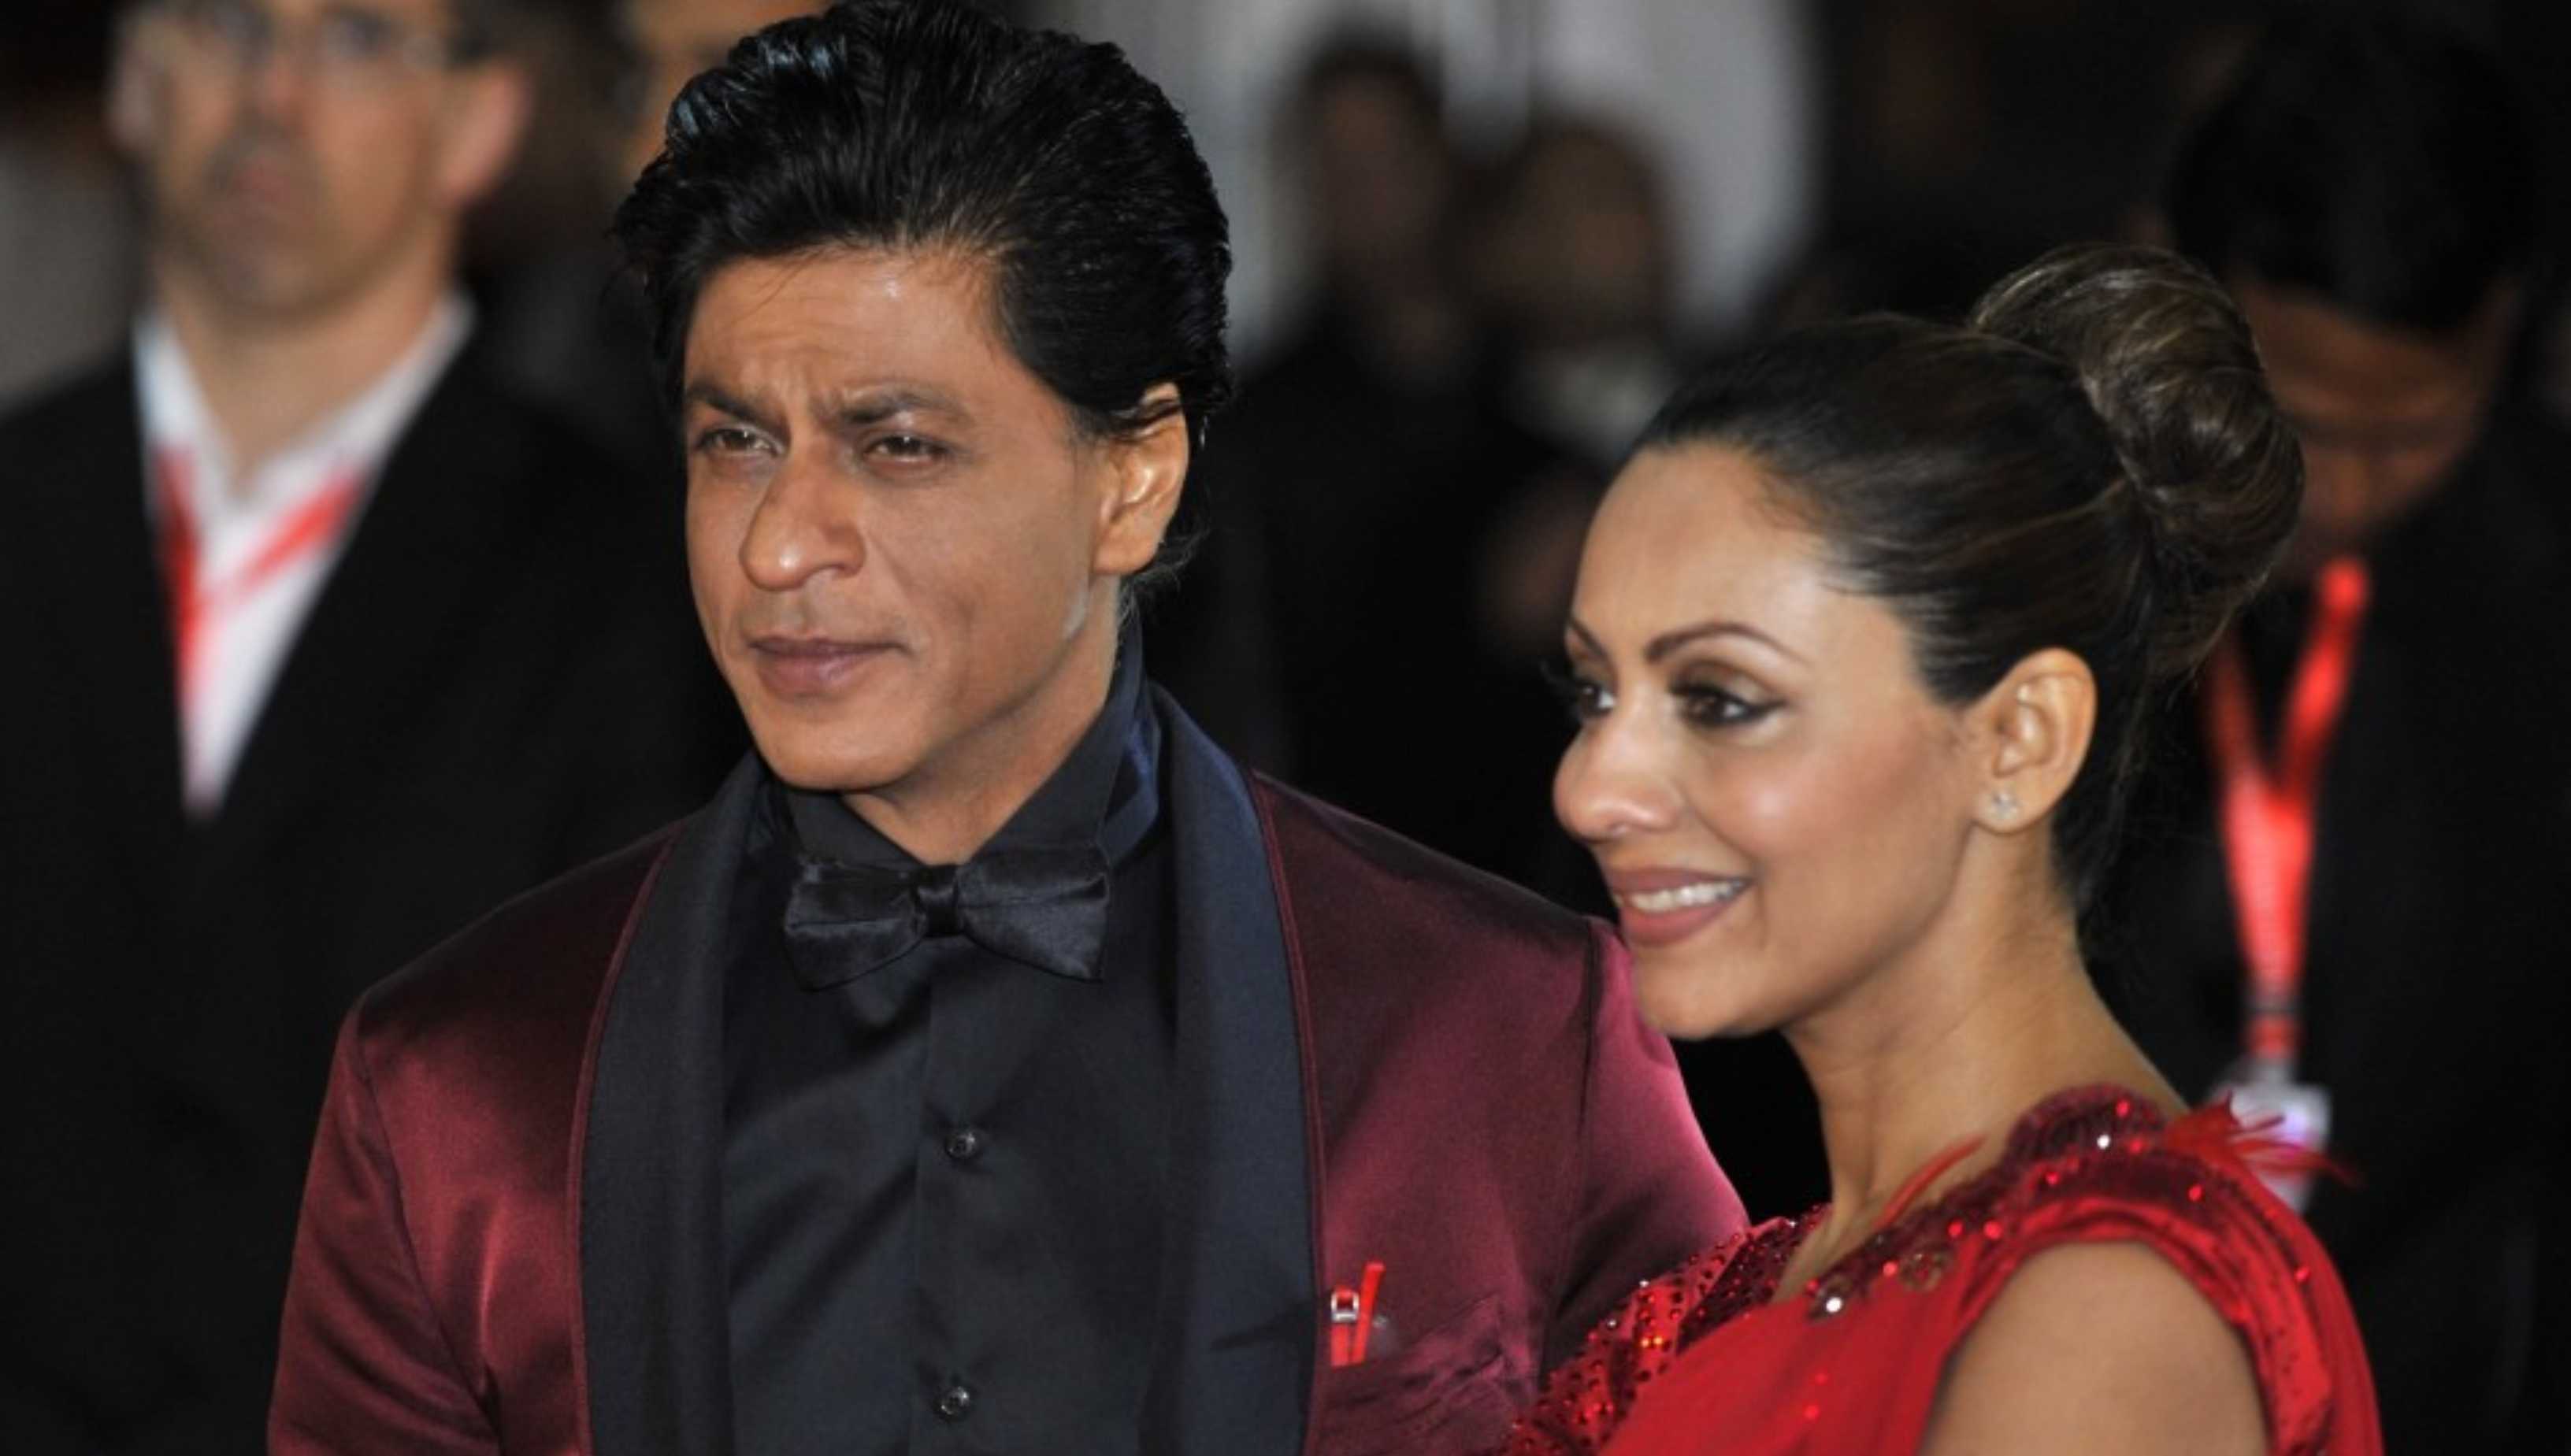 Shah Rukh Khan’s THIS habit annoys wife Gauri Khan during parties; says ‘people start looking for him’